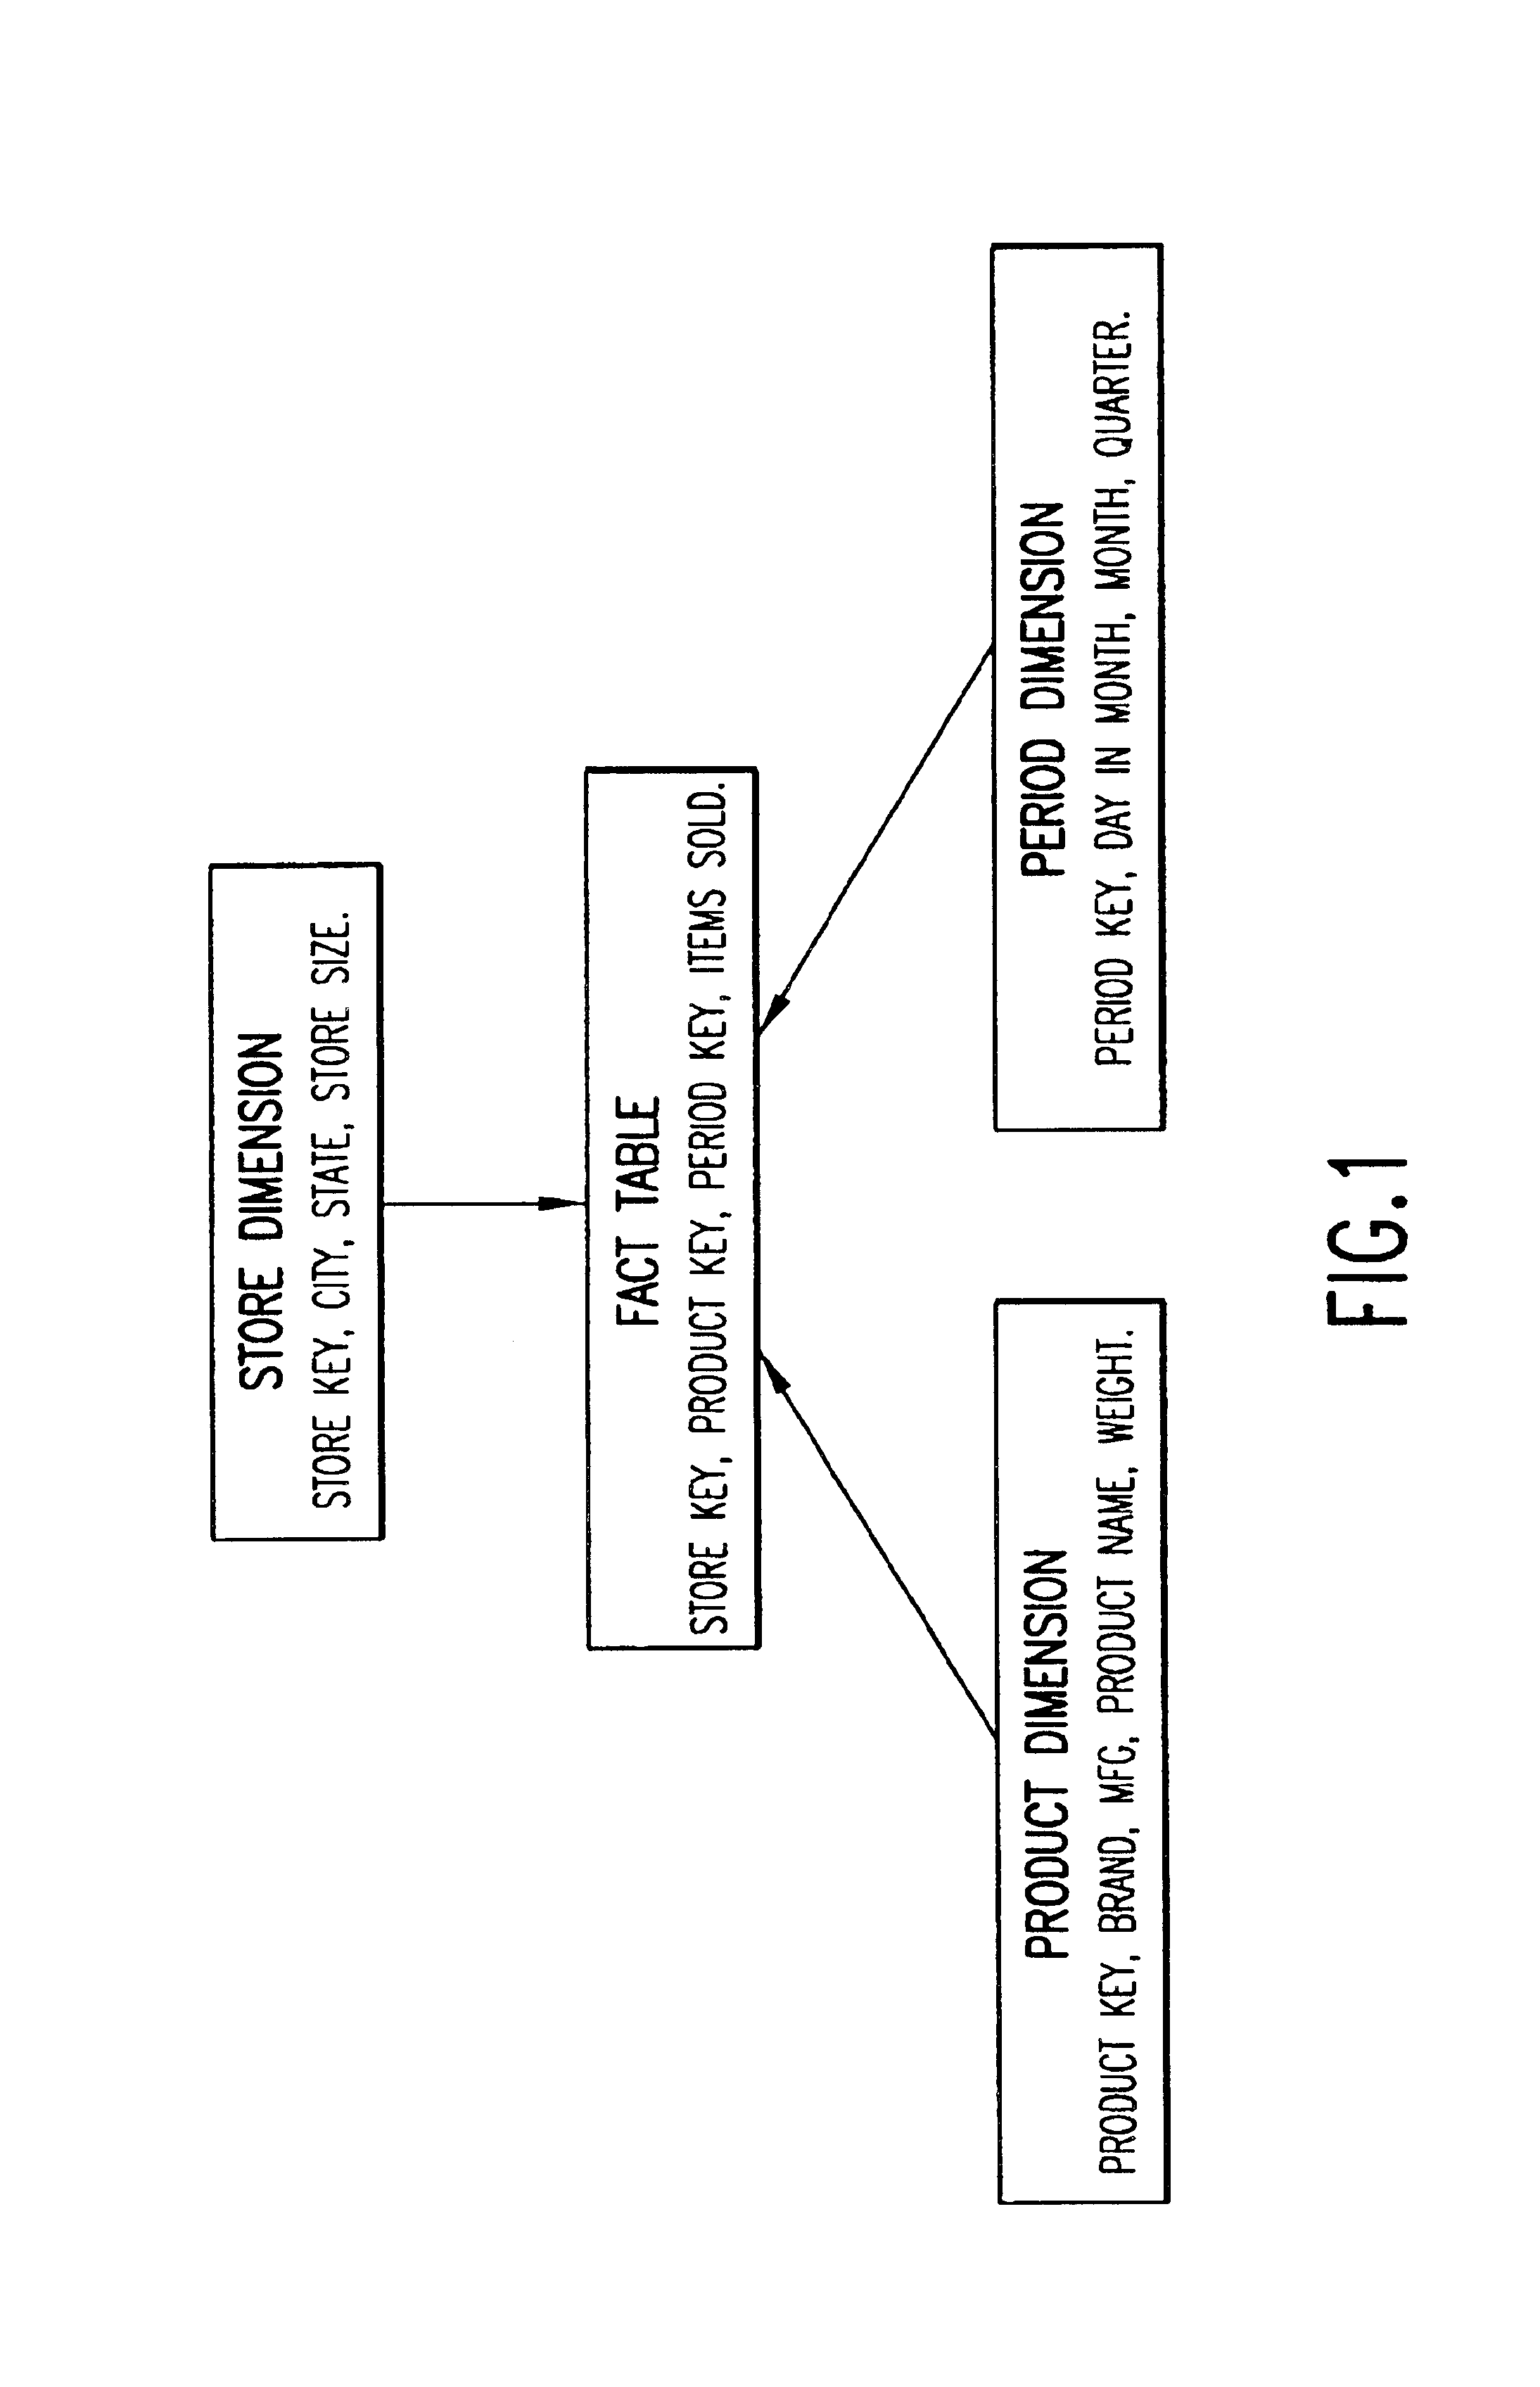 Method and apparatus for populating multiple data marts in a single aggregation process